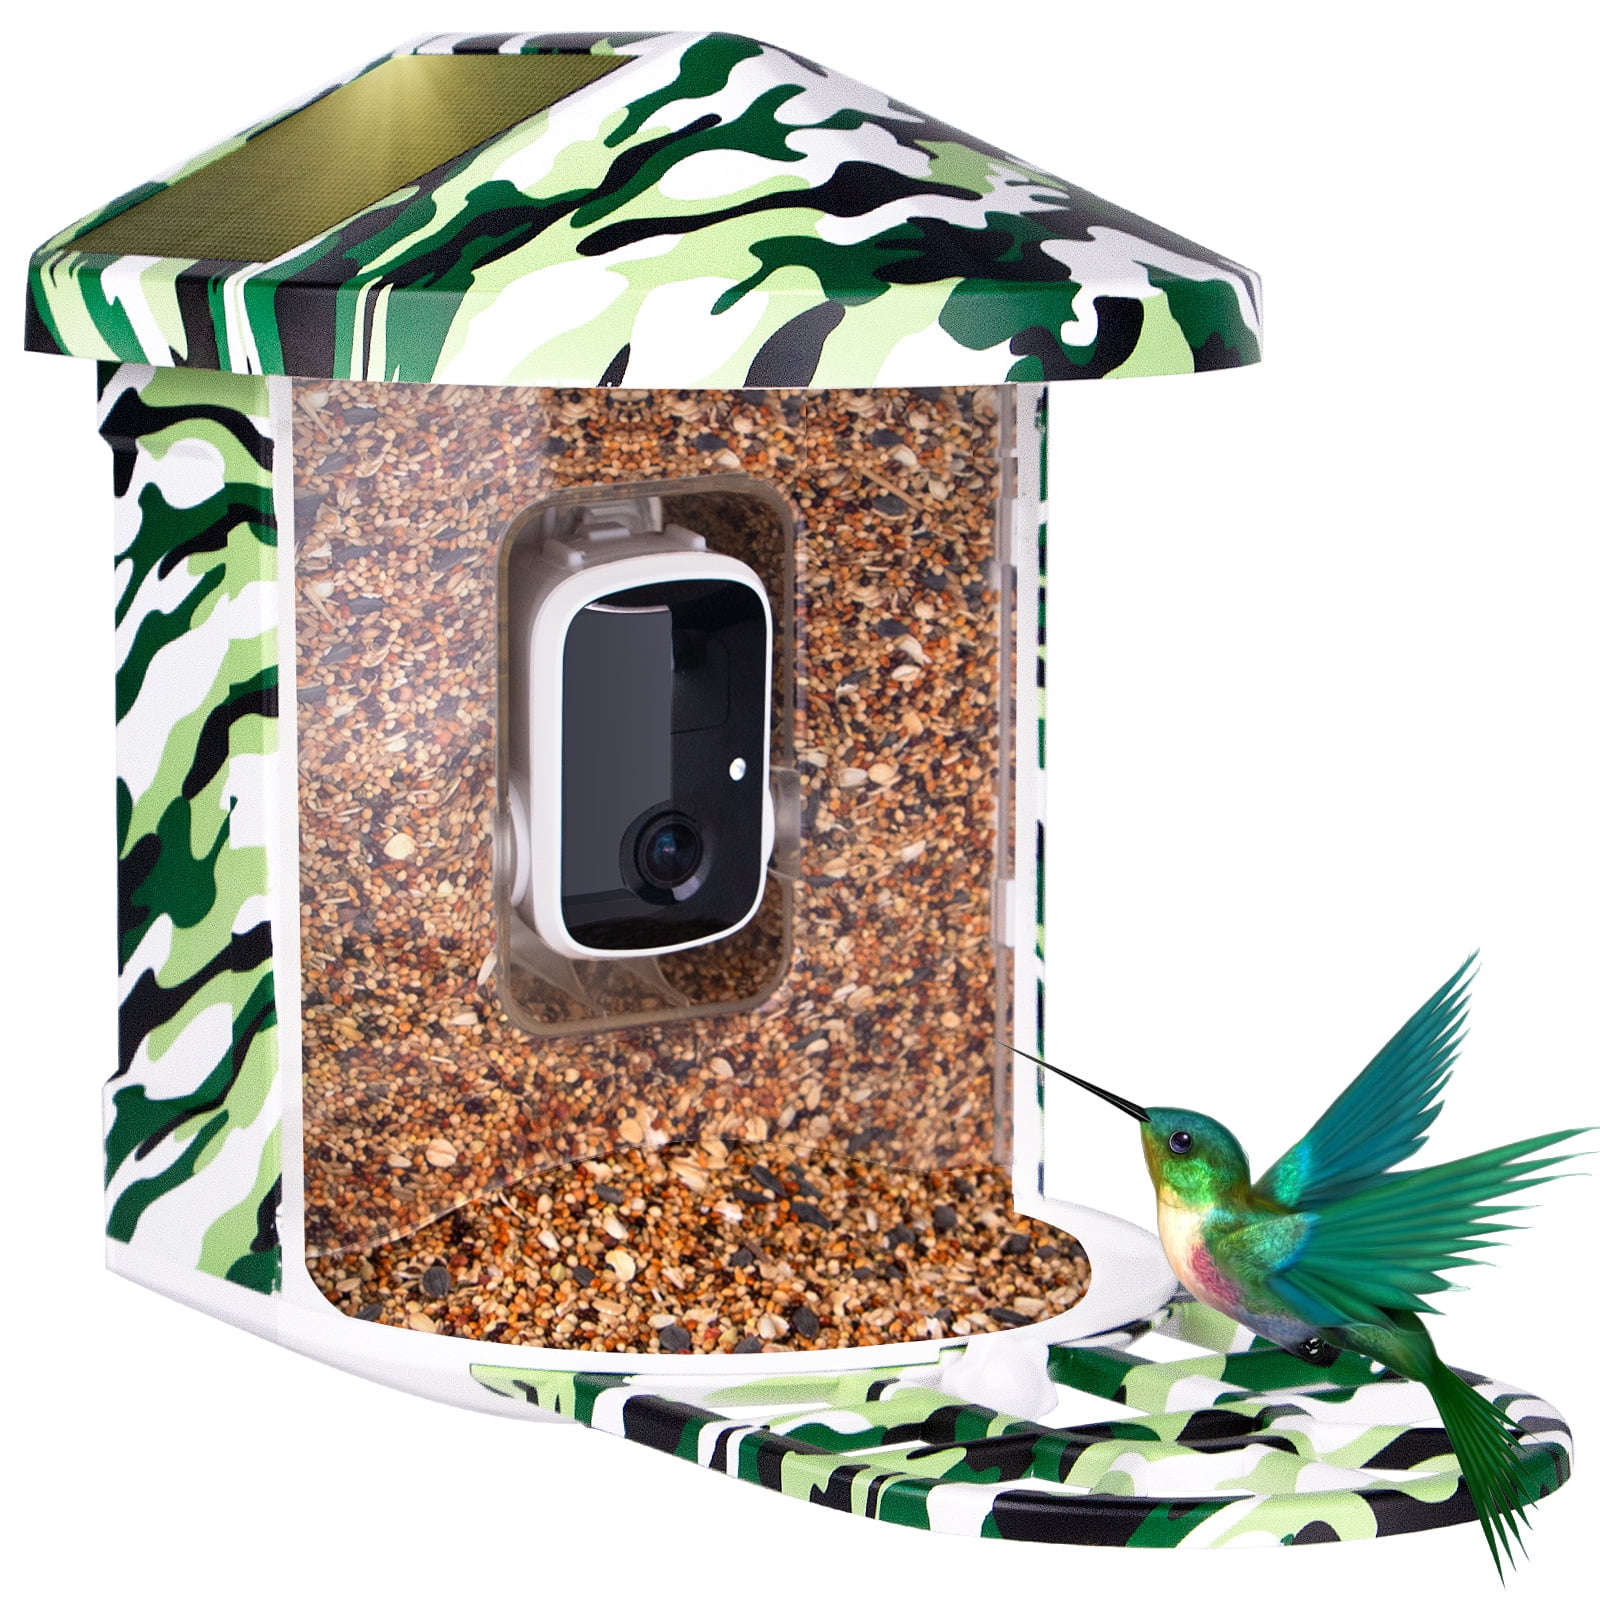 Review: Bird Buddy smart bird feeder lets you enjoy your feathered friends